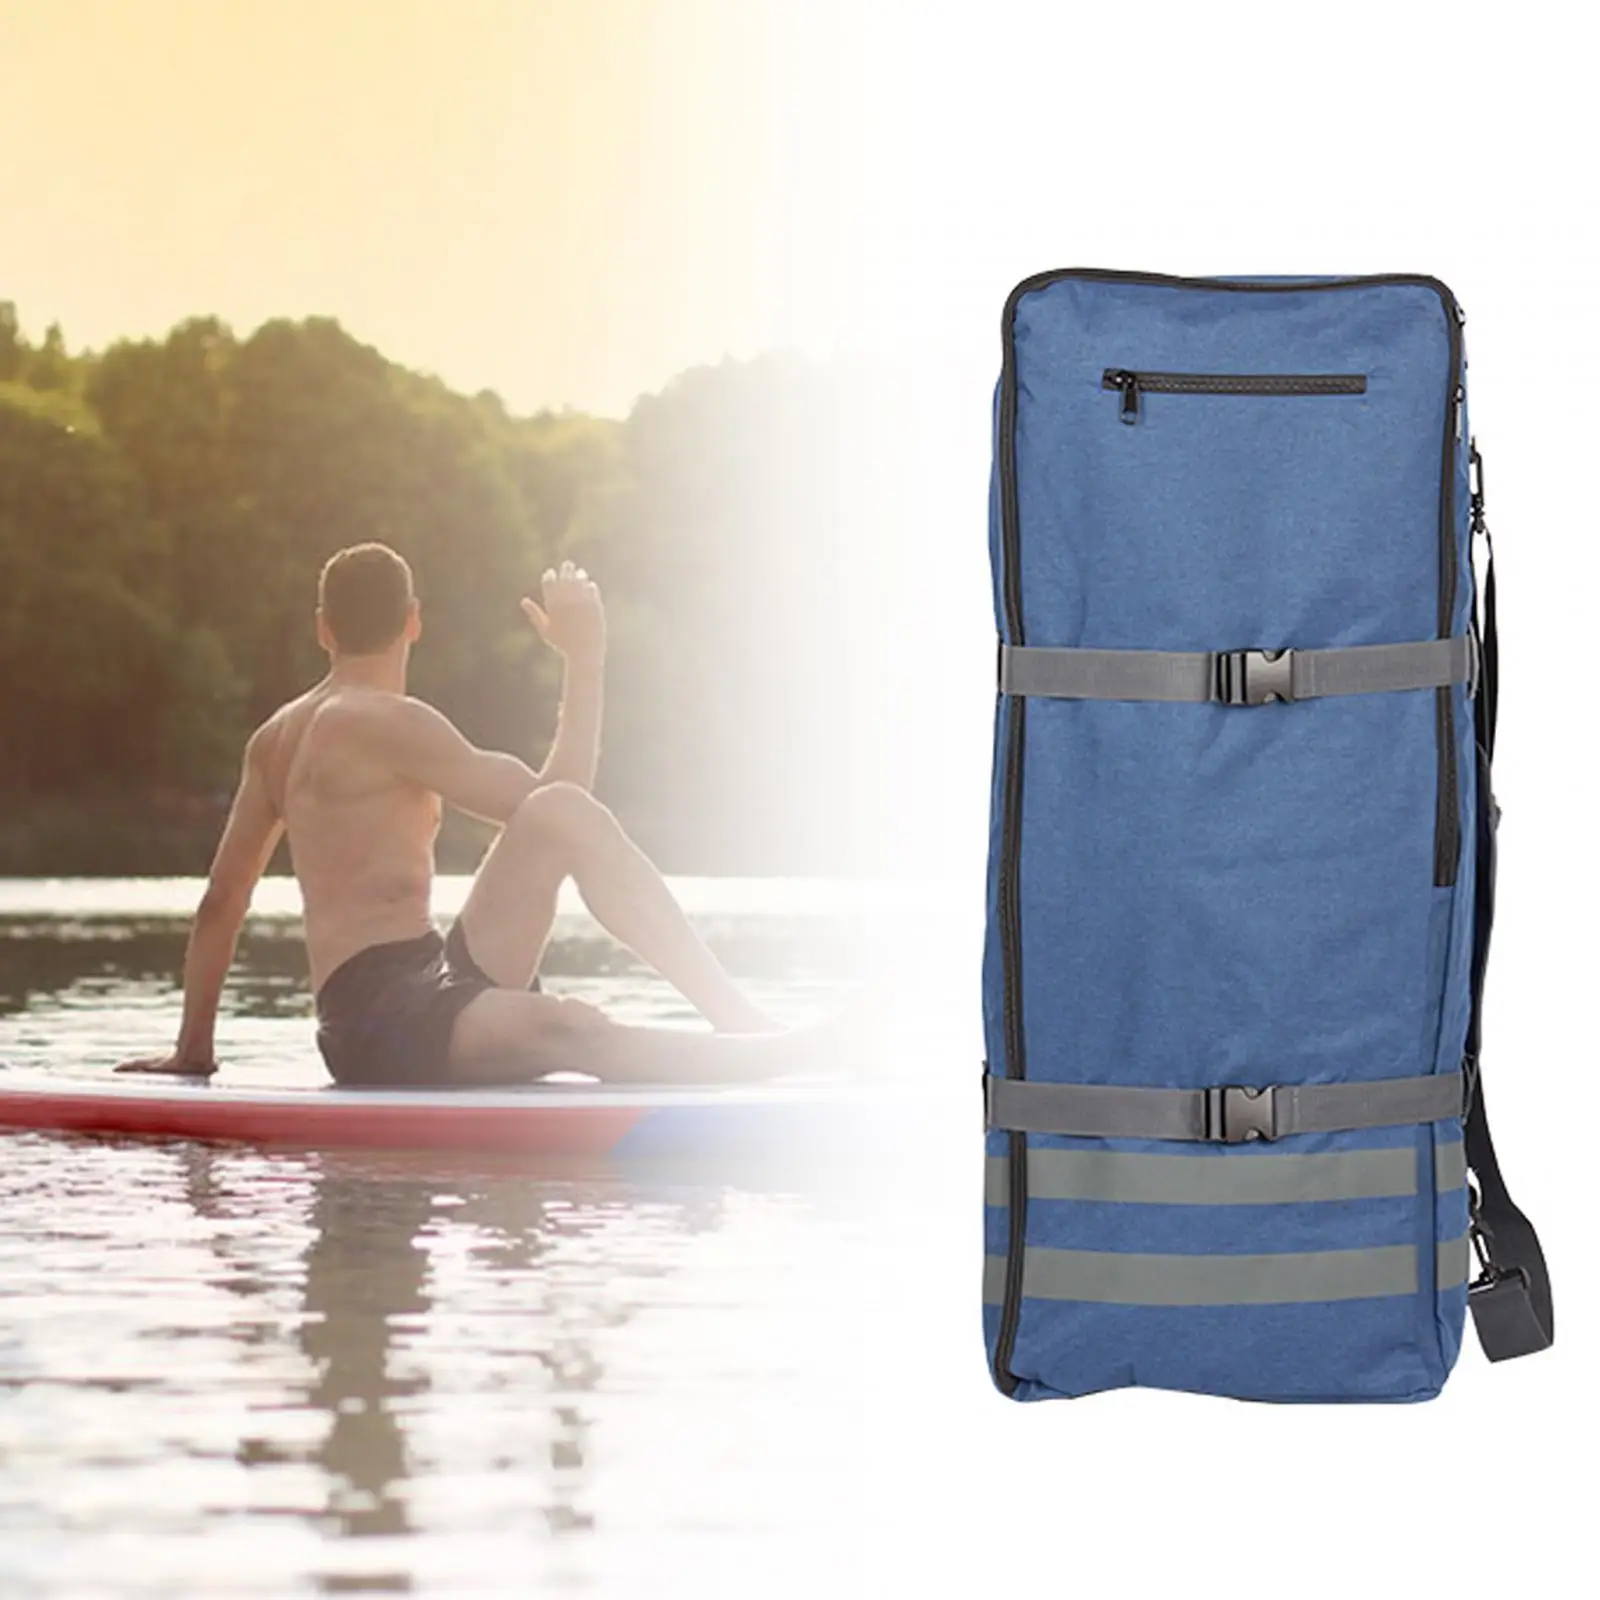 Paddle Board Travel Bag Backpack 90x36x26cm Accessories Padded Adjustable Straps